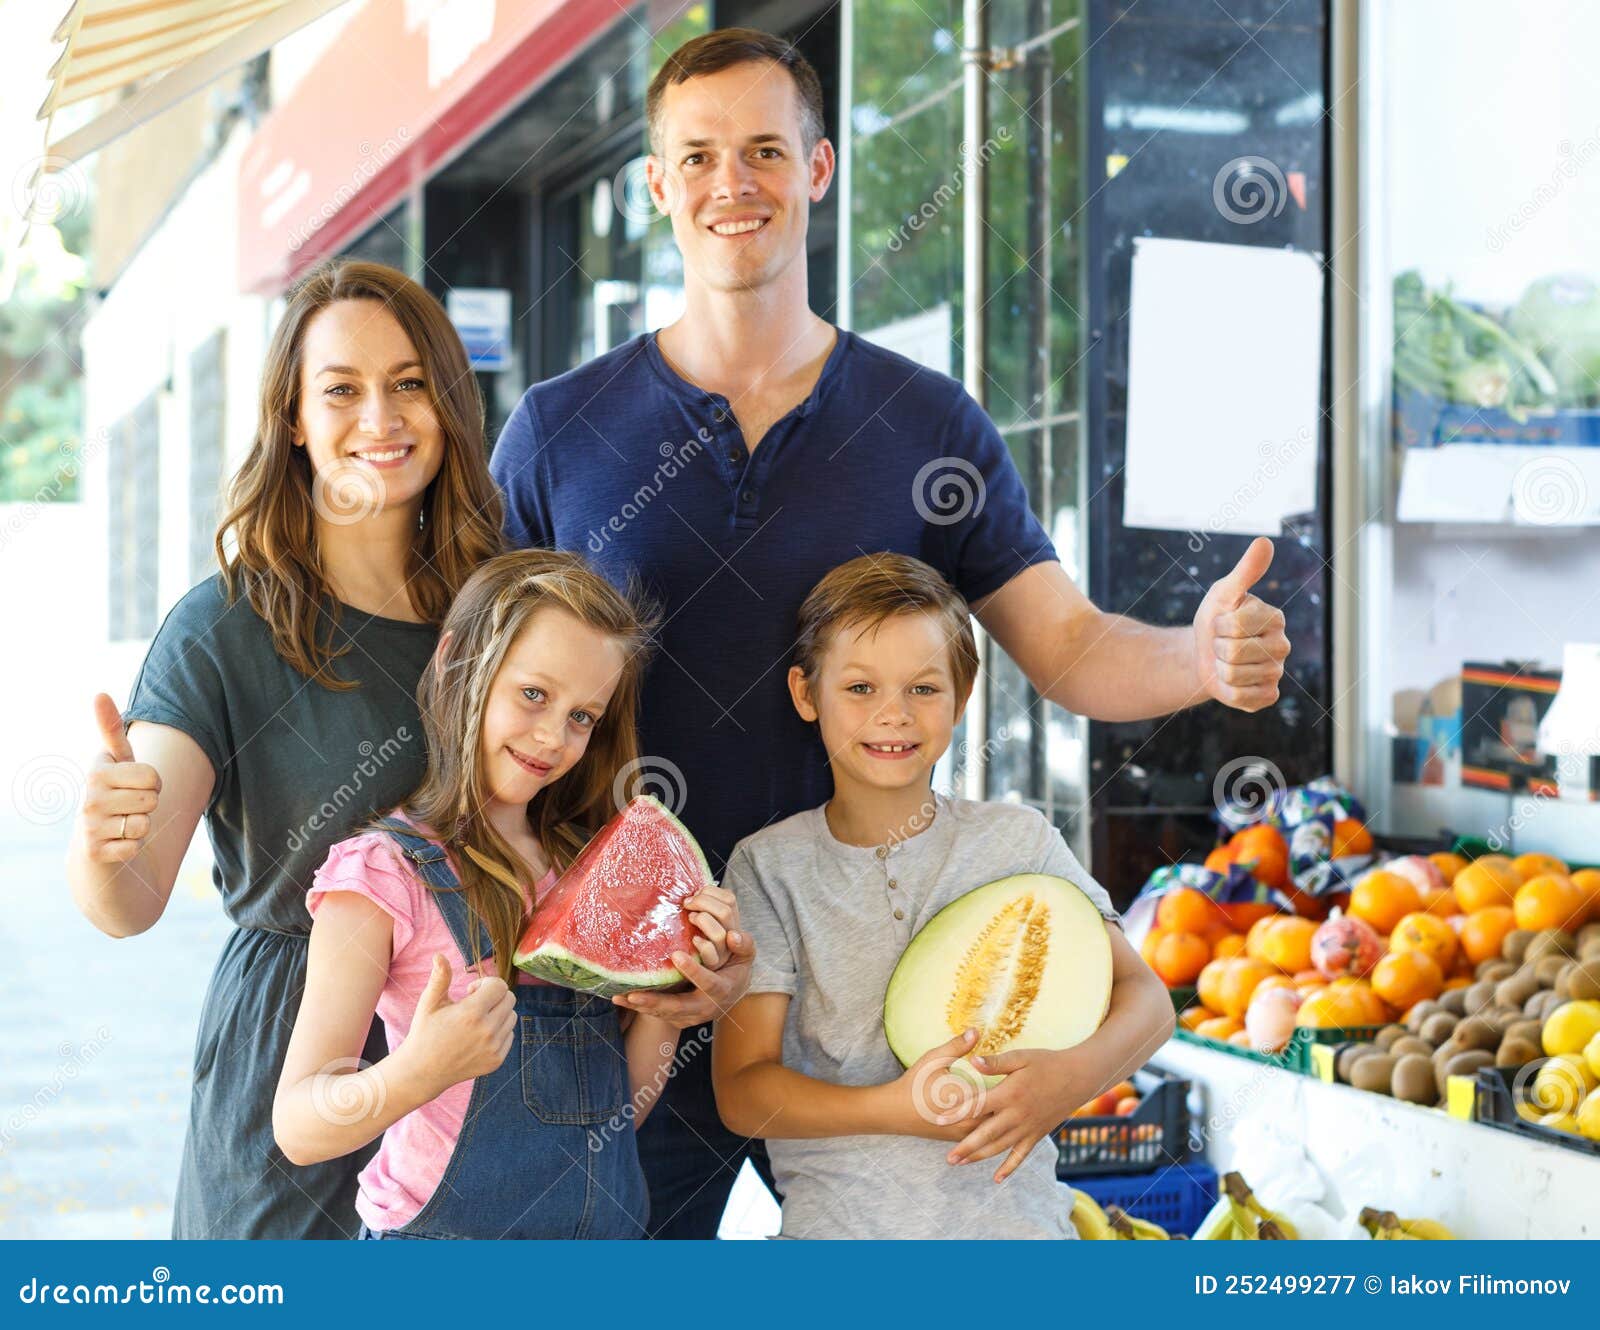 happy family with children demostration fruits